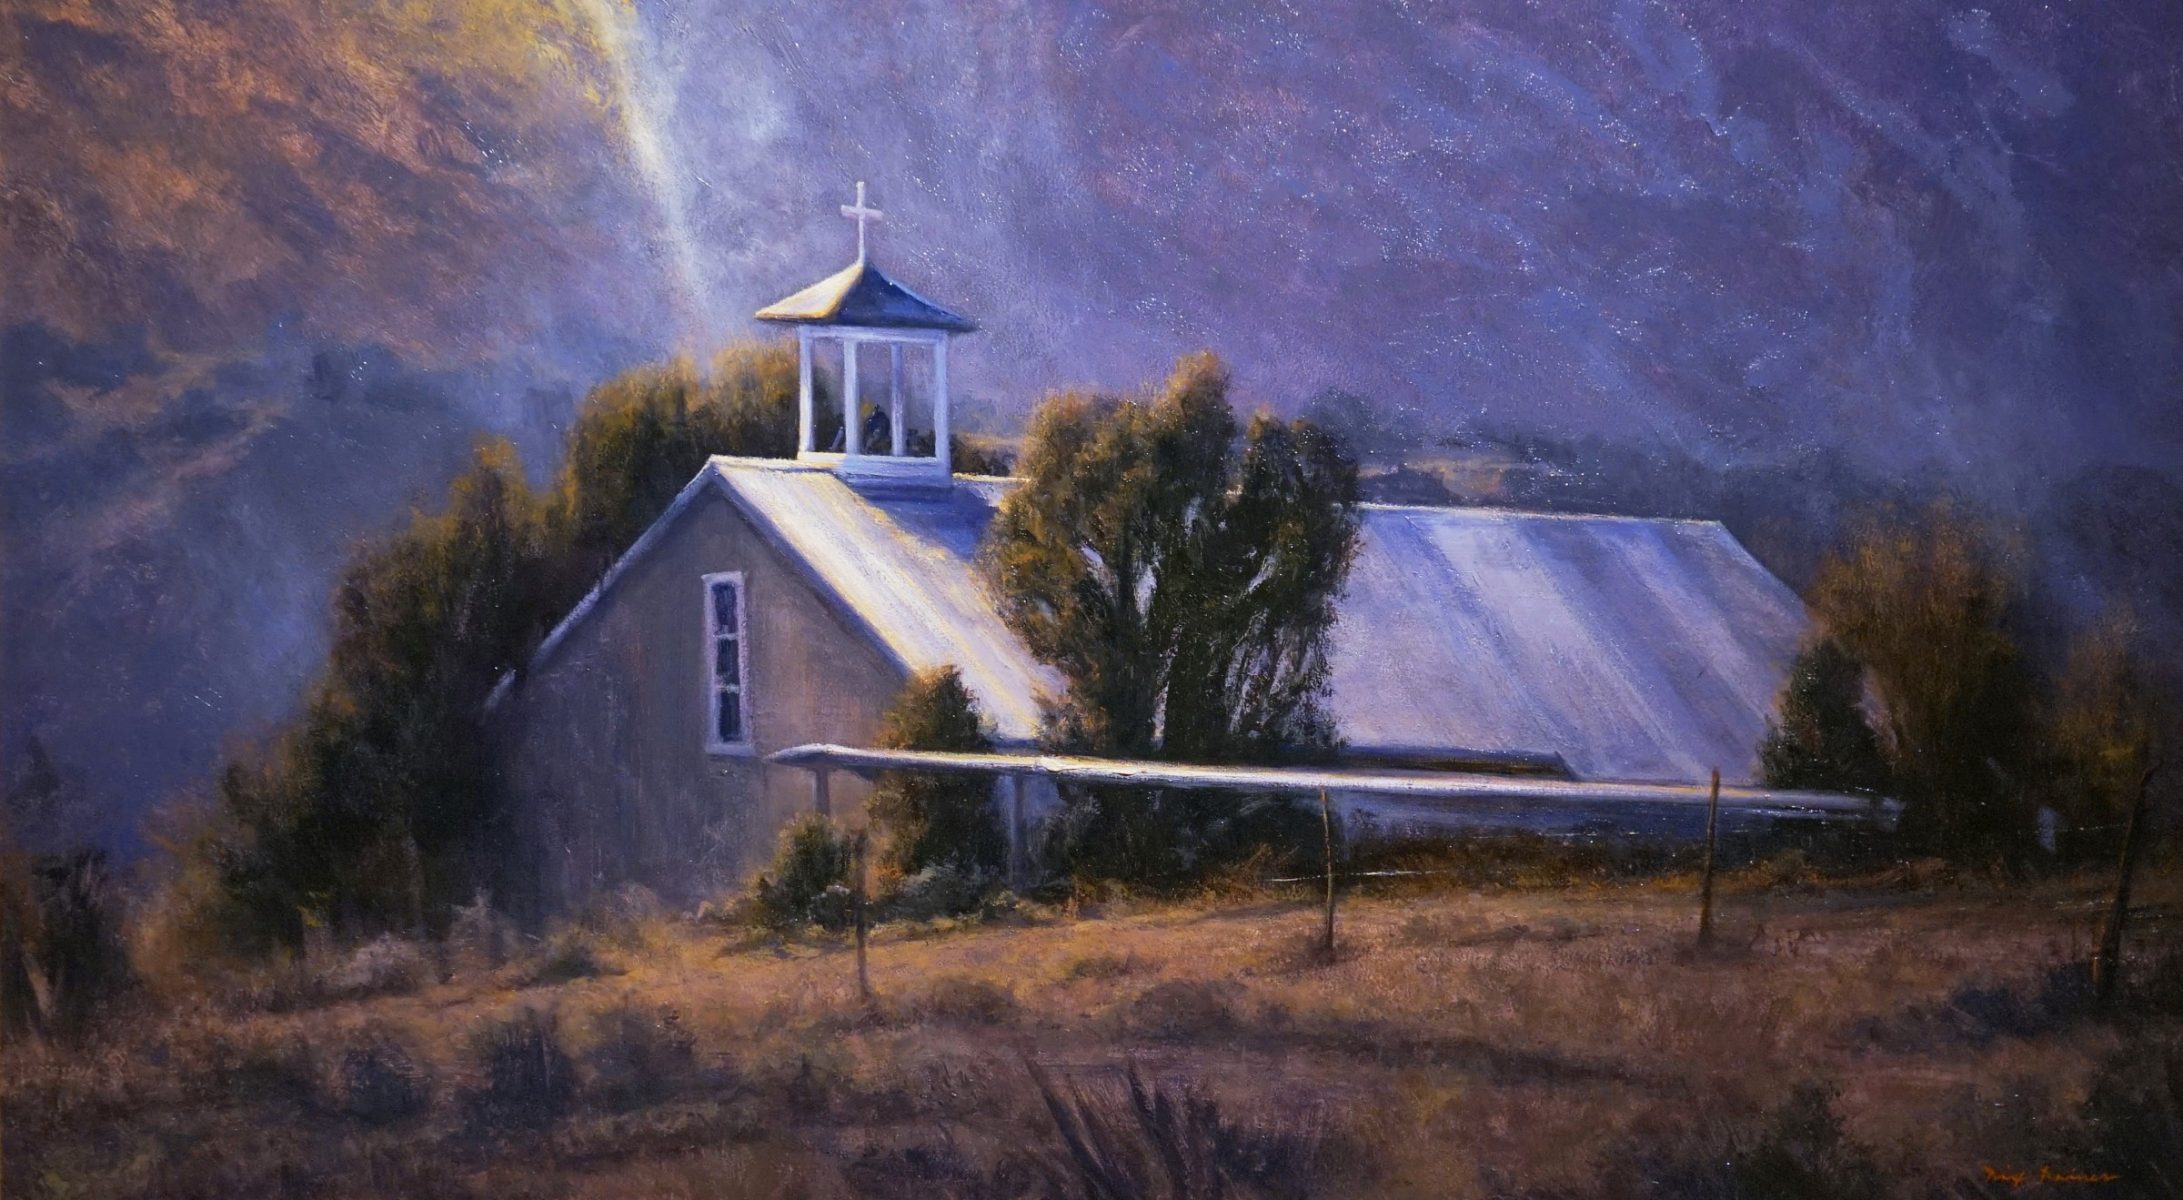 Oil painting of adobe church by Dix Baines